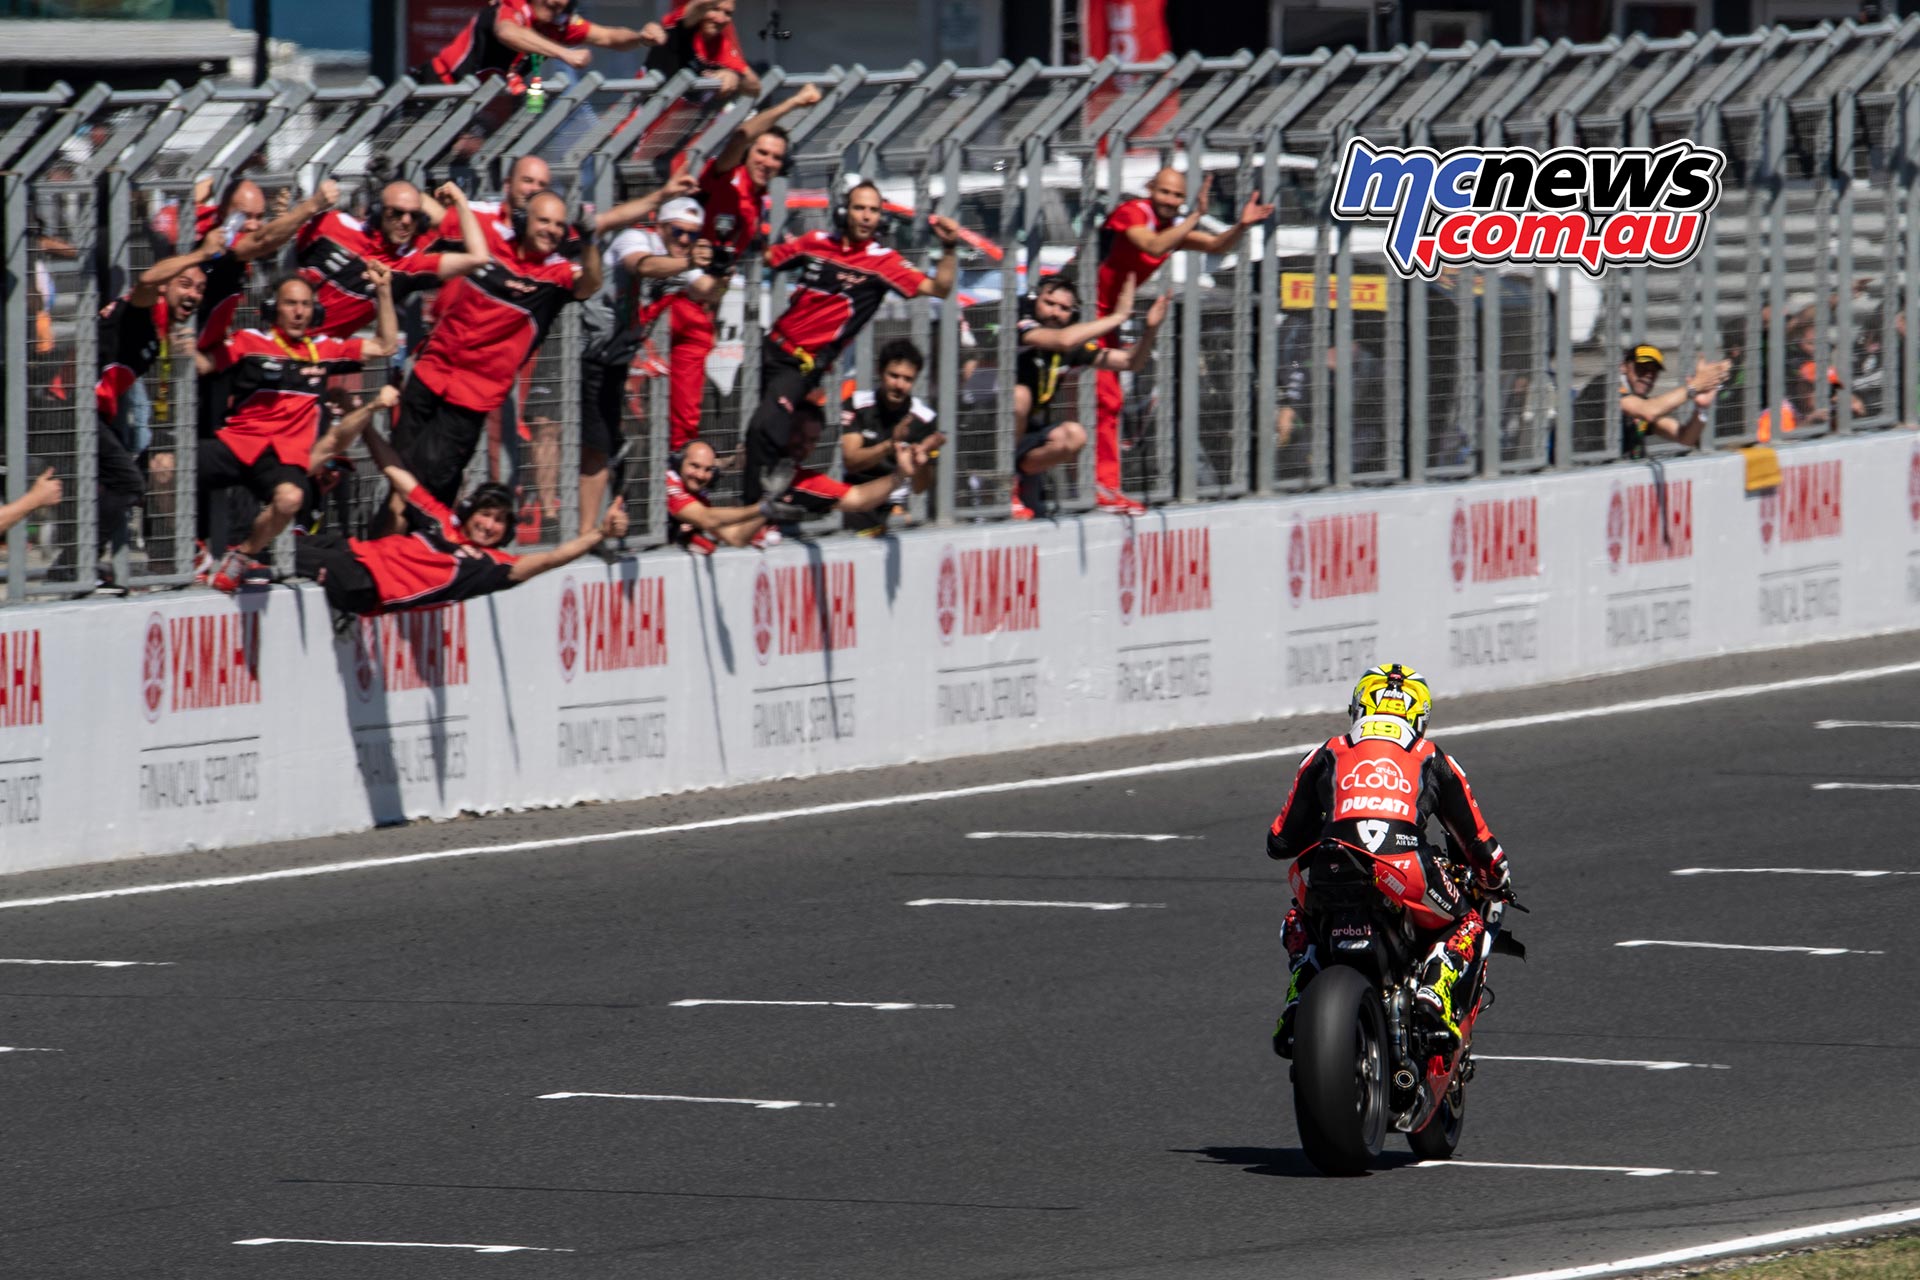 WSBK Rnd Race Alvaro Bautista ..first victory for the Ducati Panigale VR in world superbike